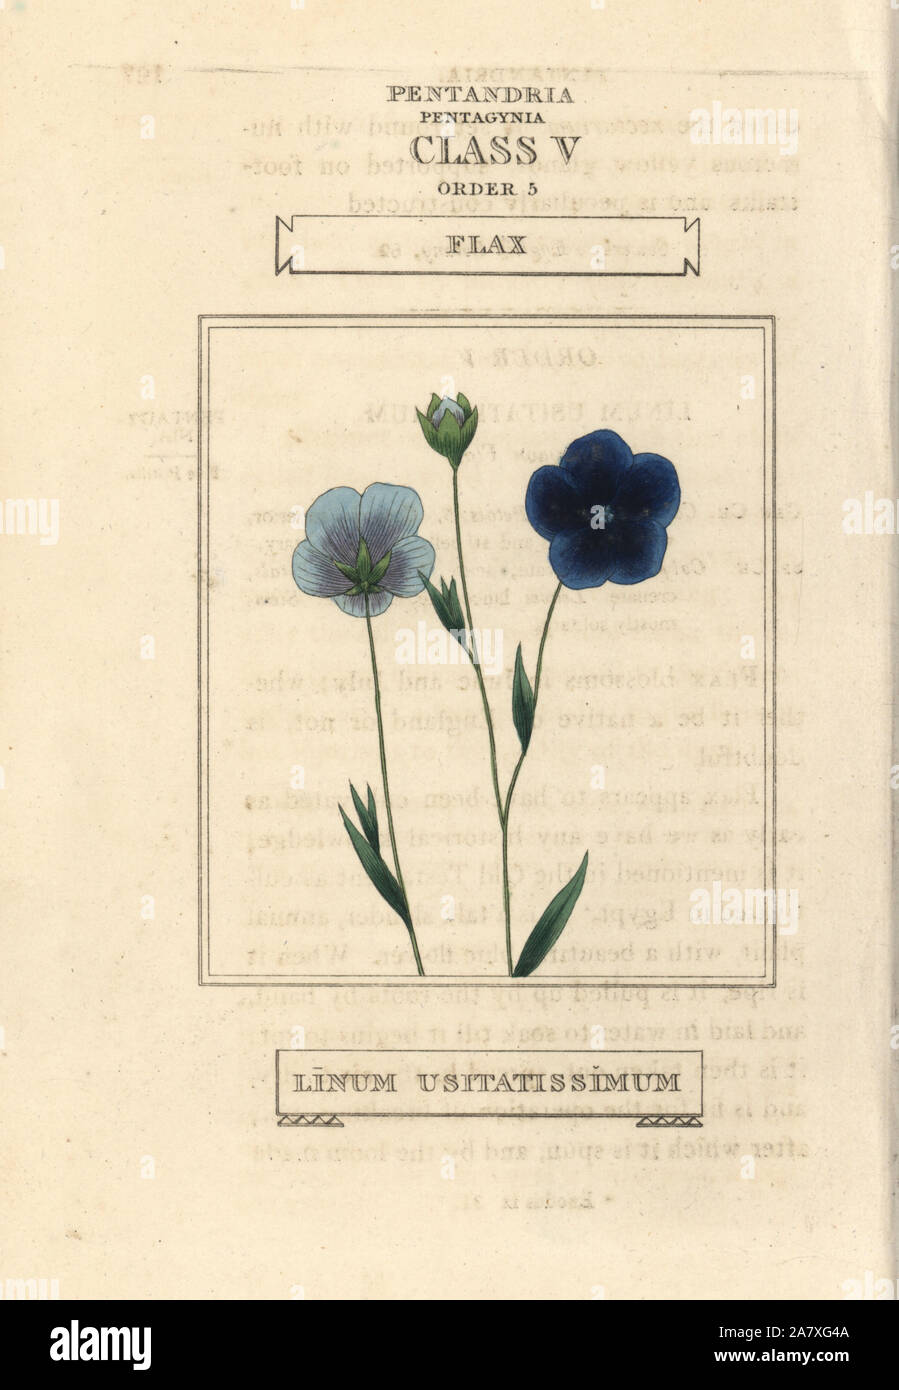 Flax, Linum usitatissimum. Handcoloured copperplate engraving after an illustration by Richard Duppa from his The Classes and Orders of the Linnaean System of Botany, Longman, Hurst, London, 1816. Stock Photo